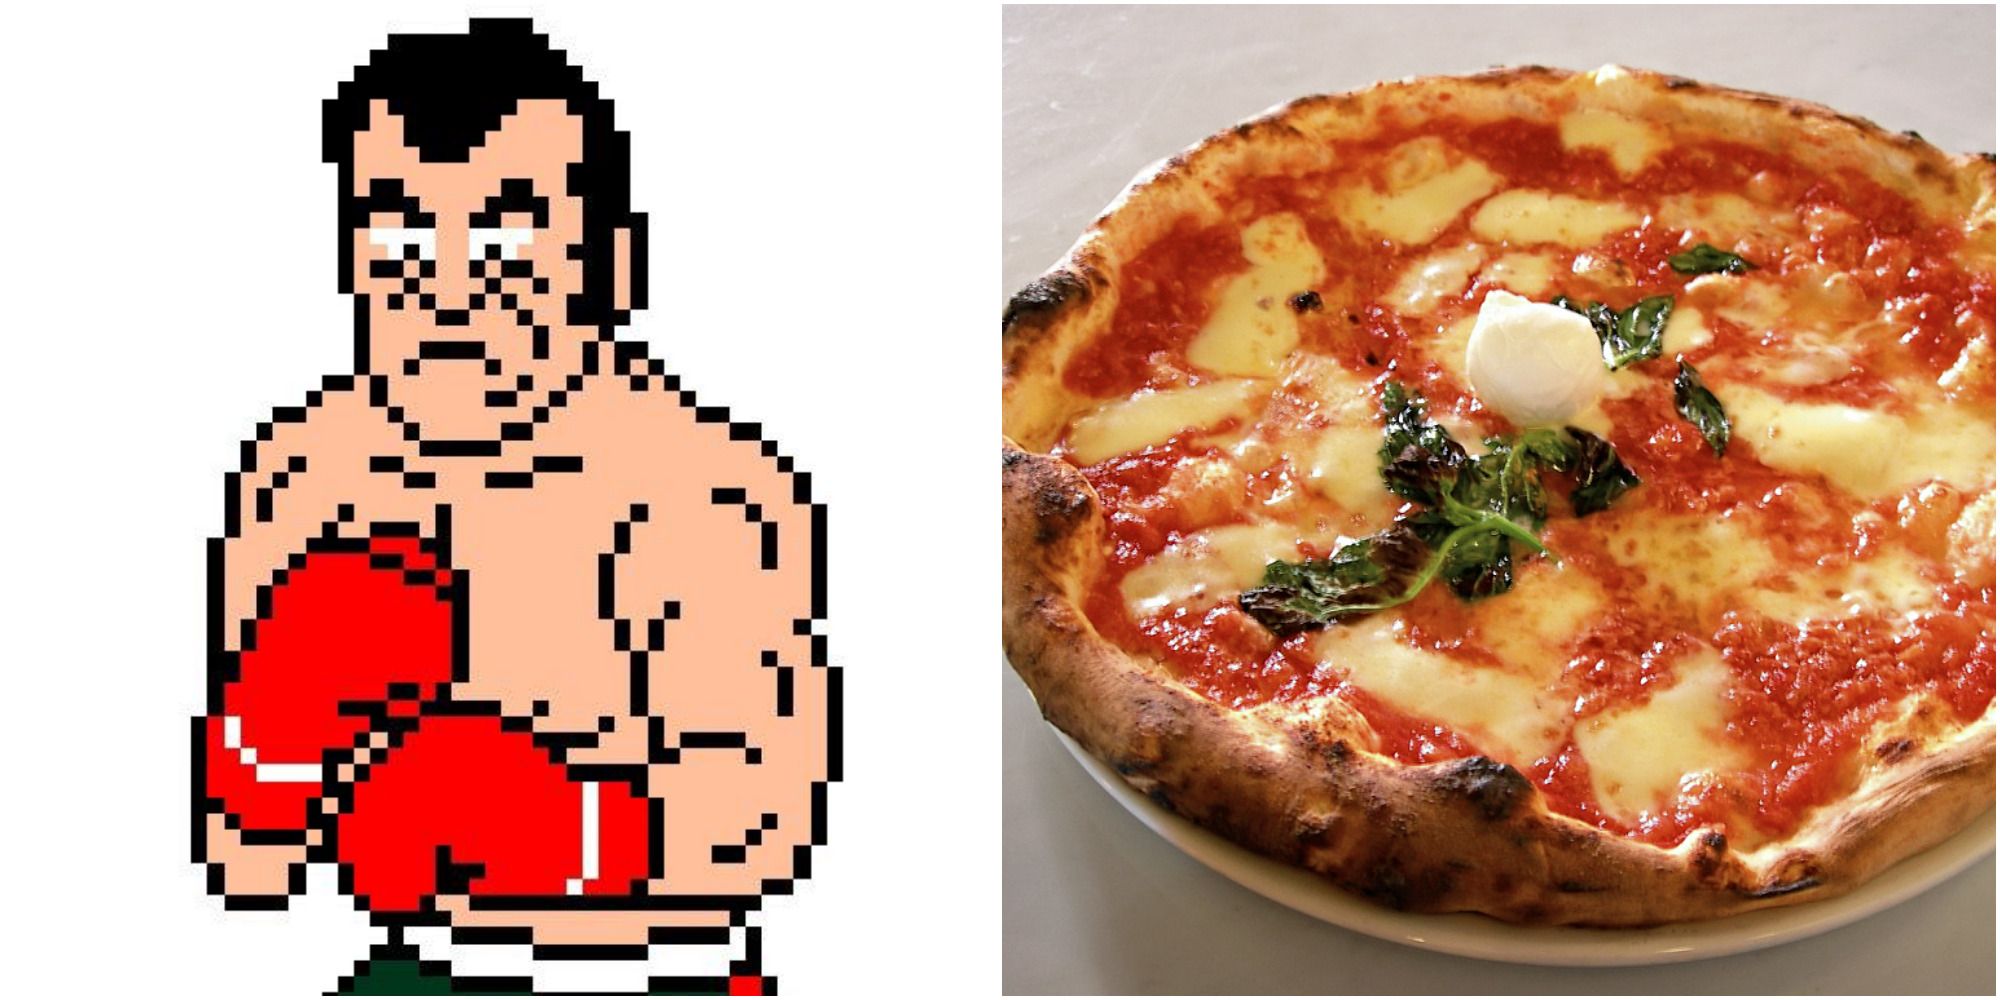 A screenshot of the boxer Pizza Pasta from the arcade version of Punch-Out!!, collaged next to a photo of a pizza